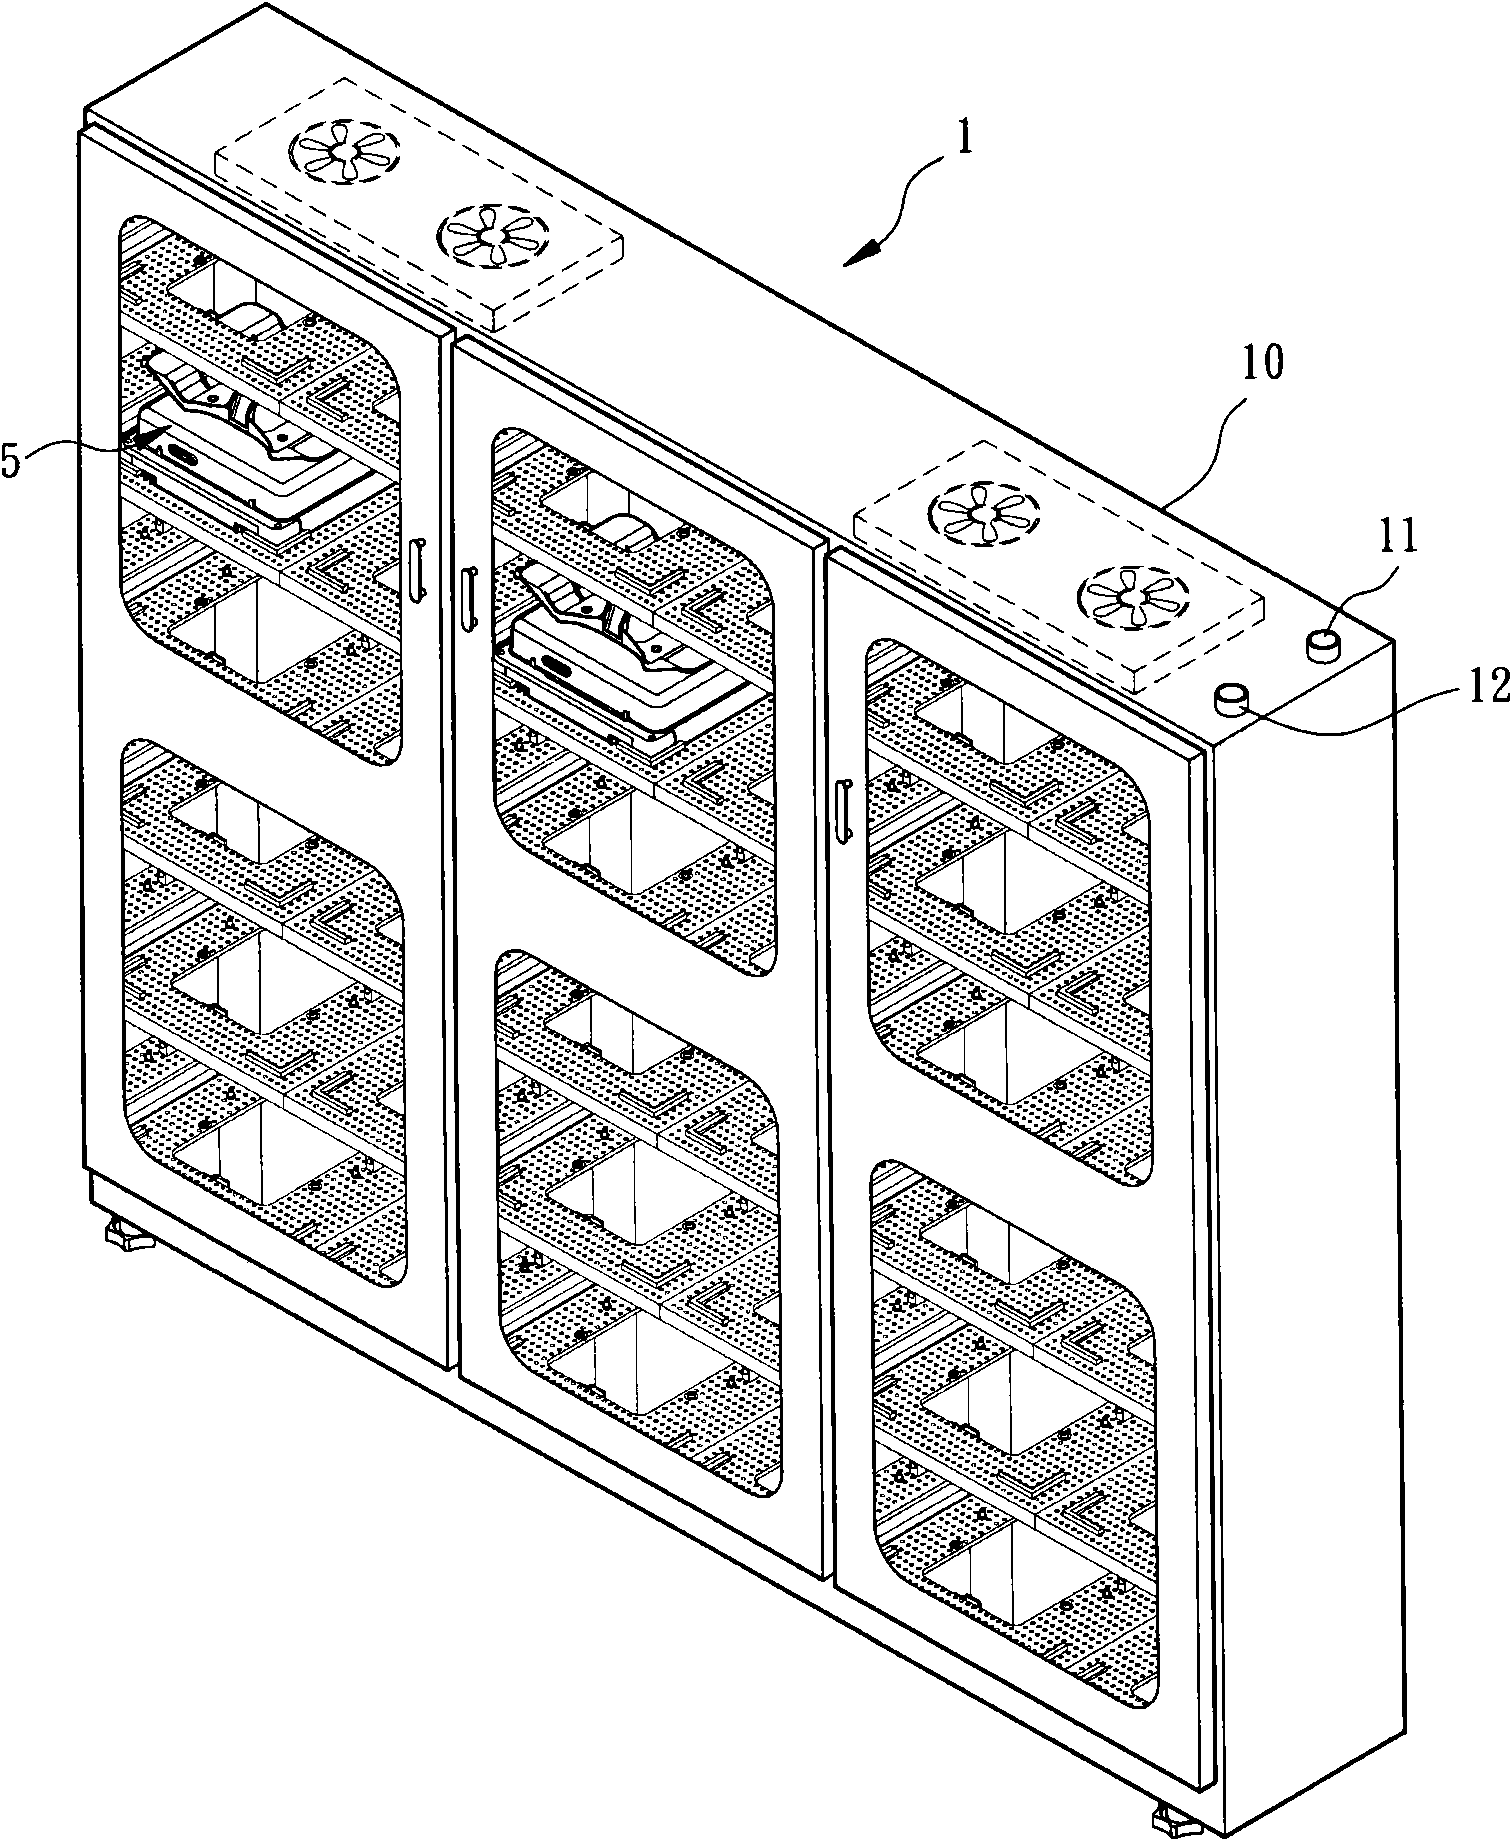 Pressure-maintaining system applied to transplanting container